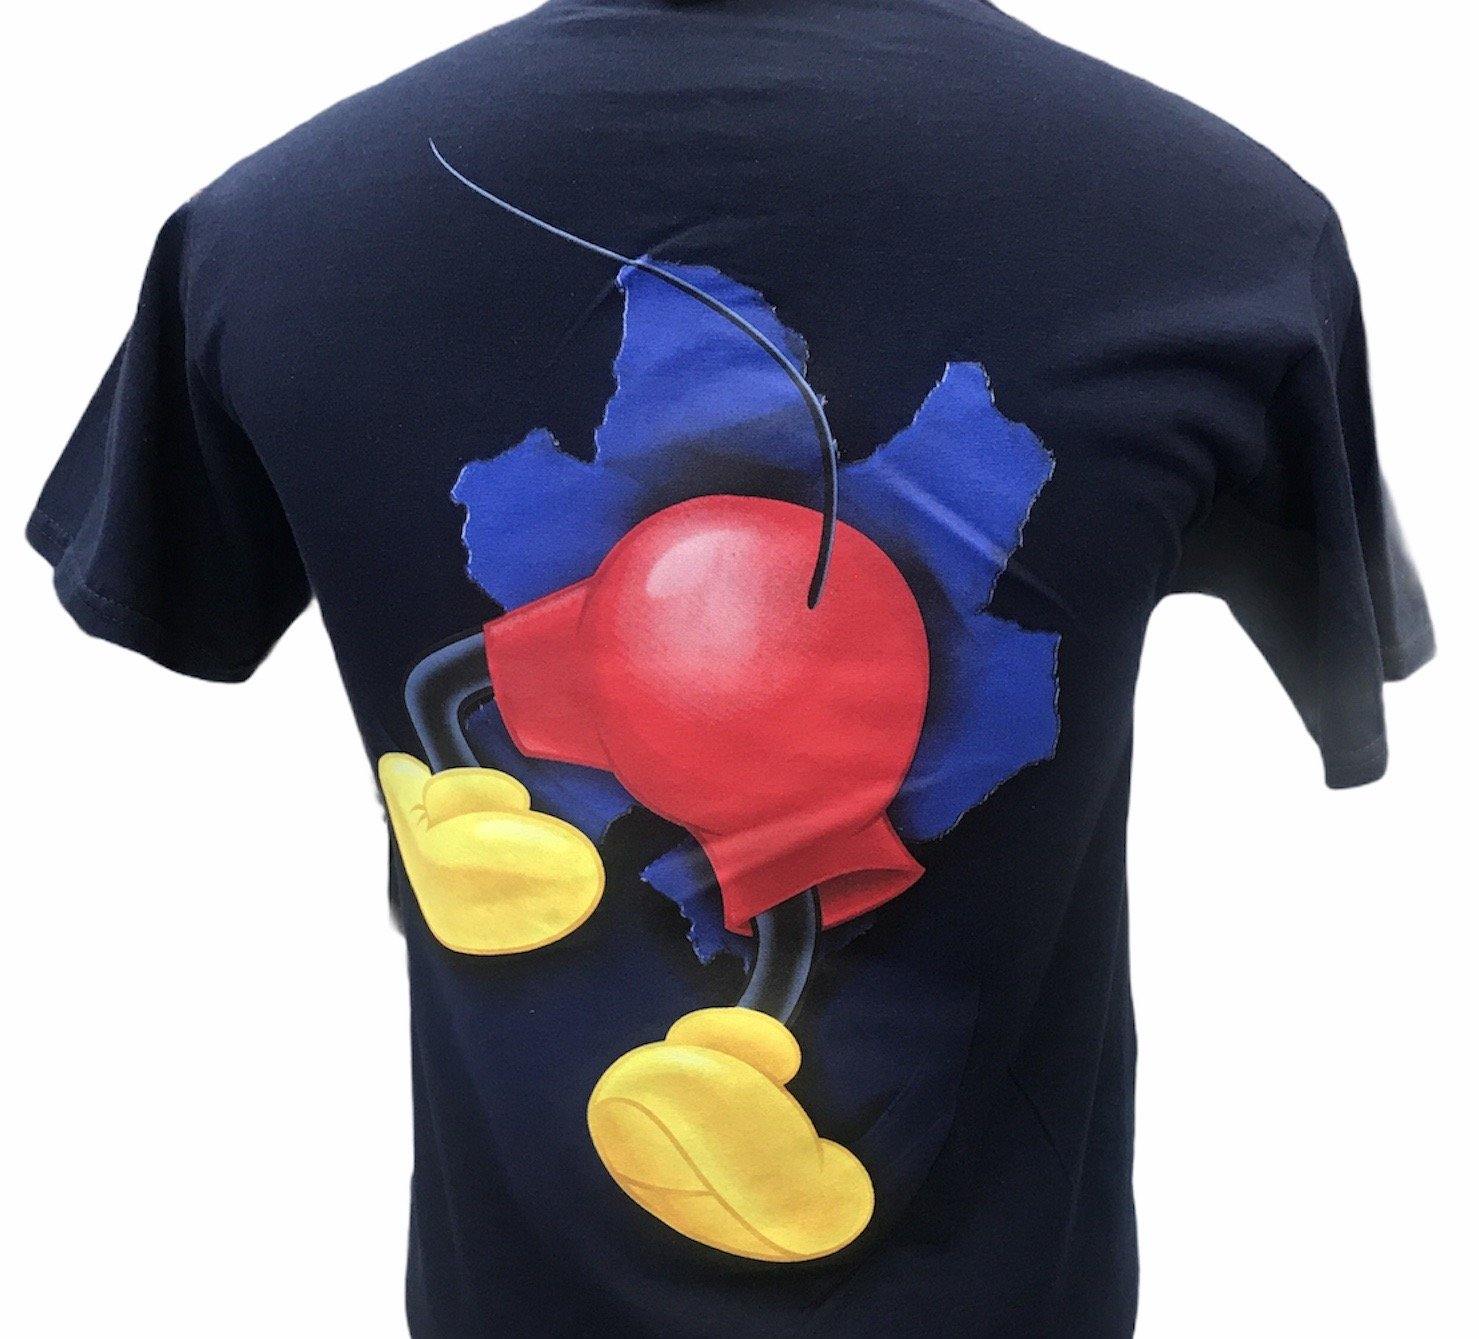 Disney Adult Pop Out Mickey Tee